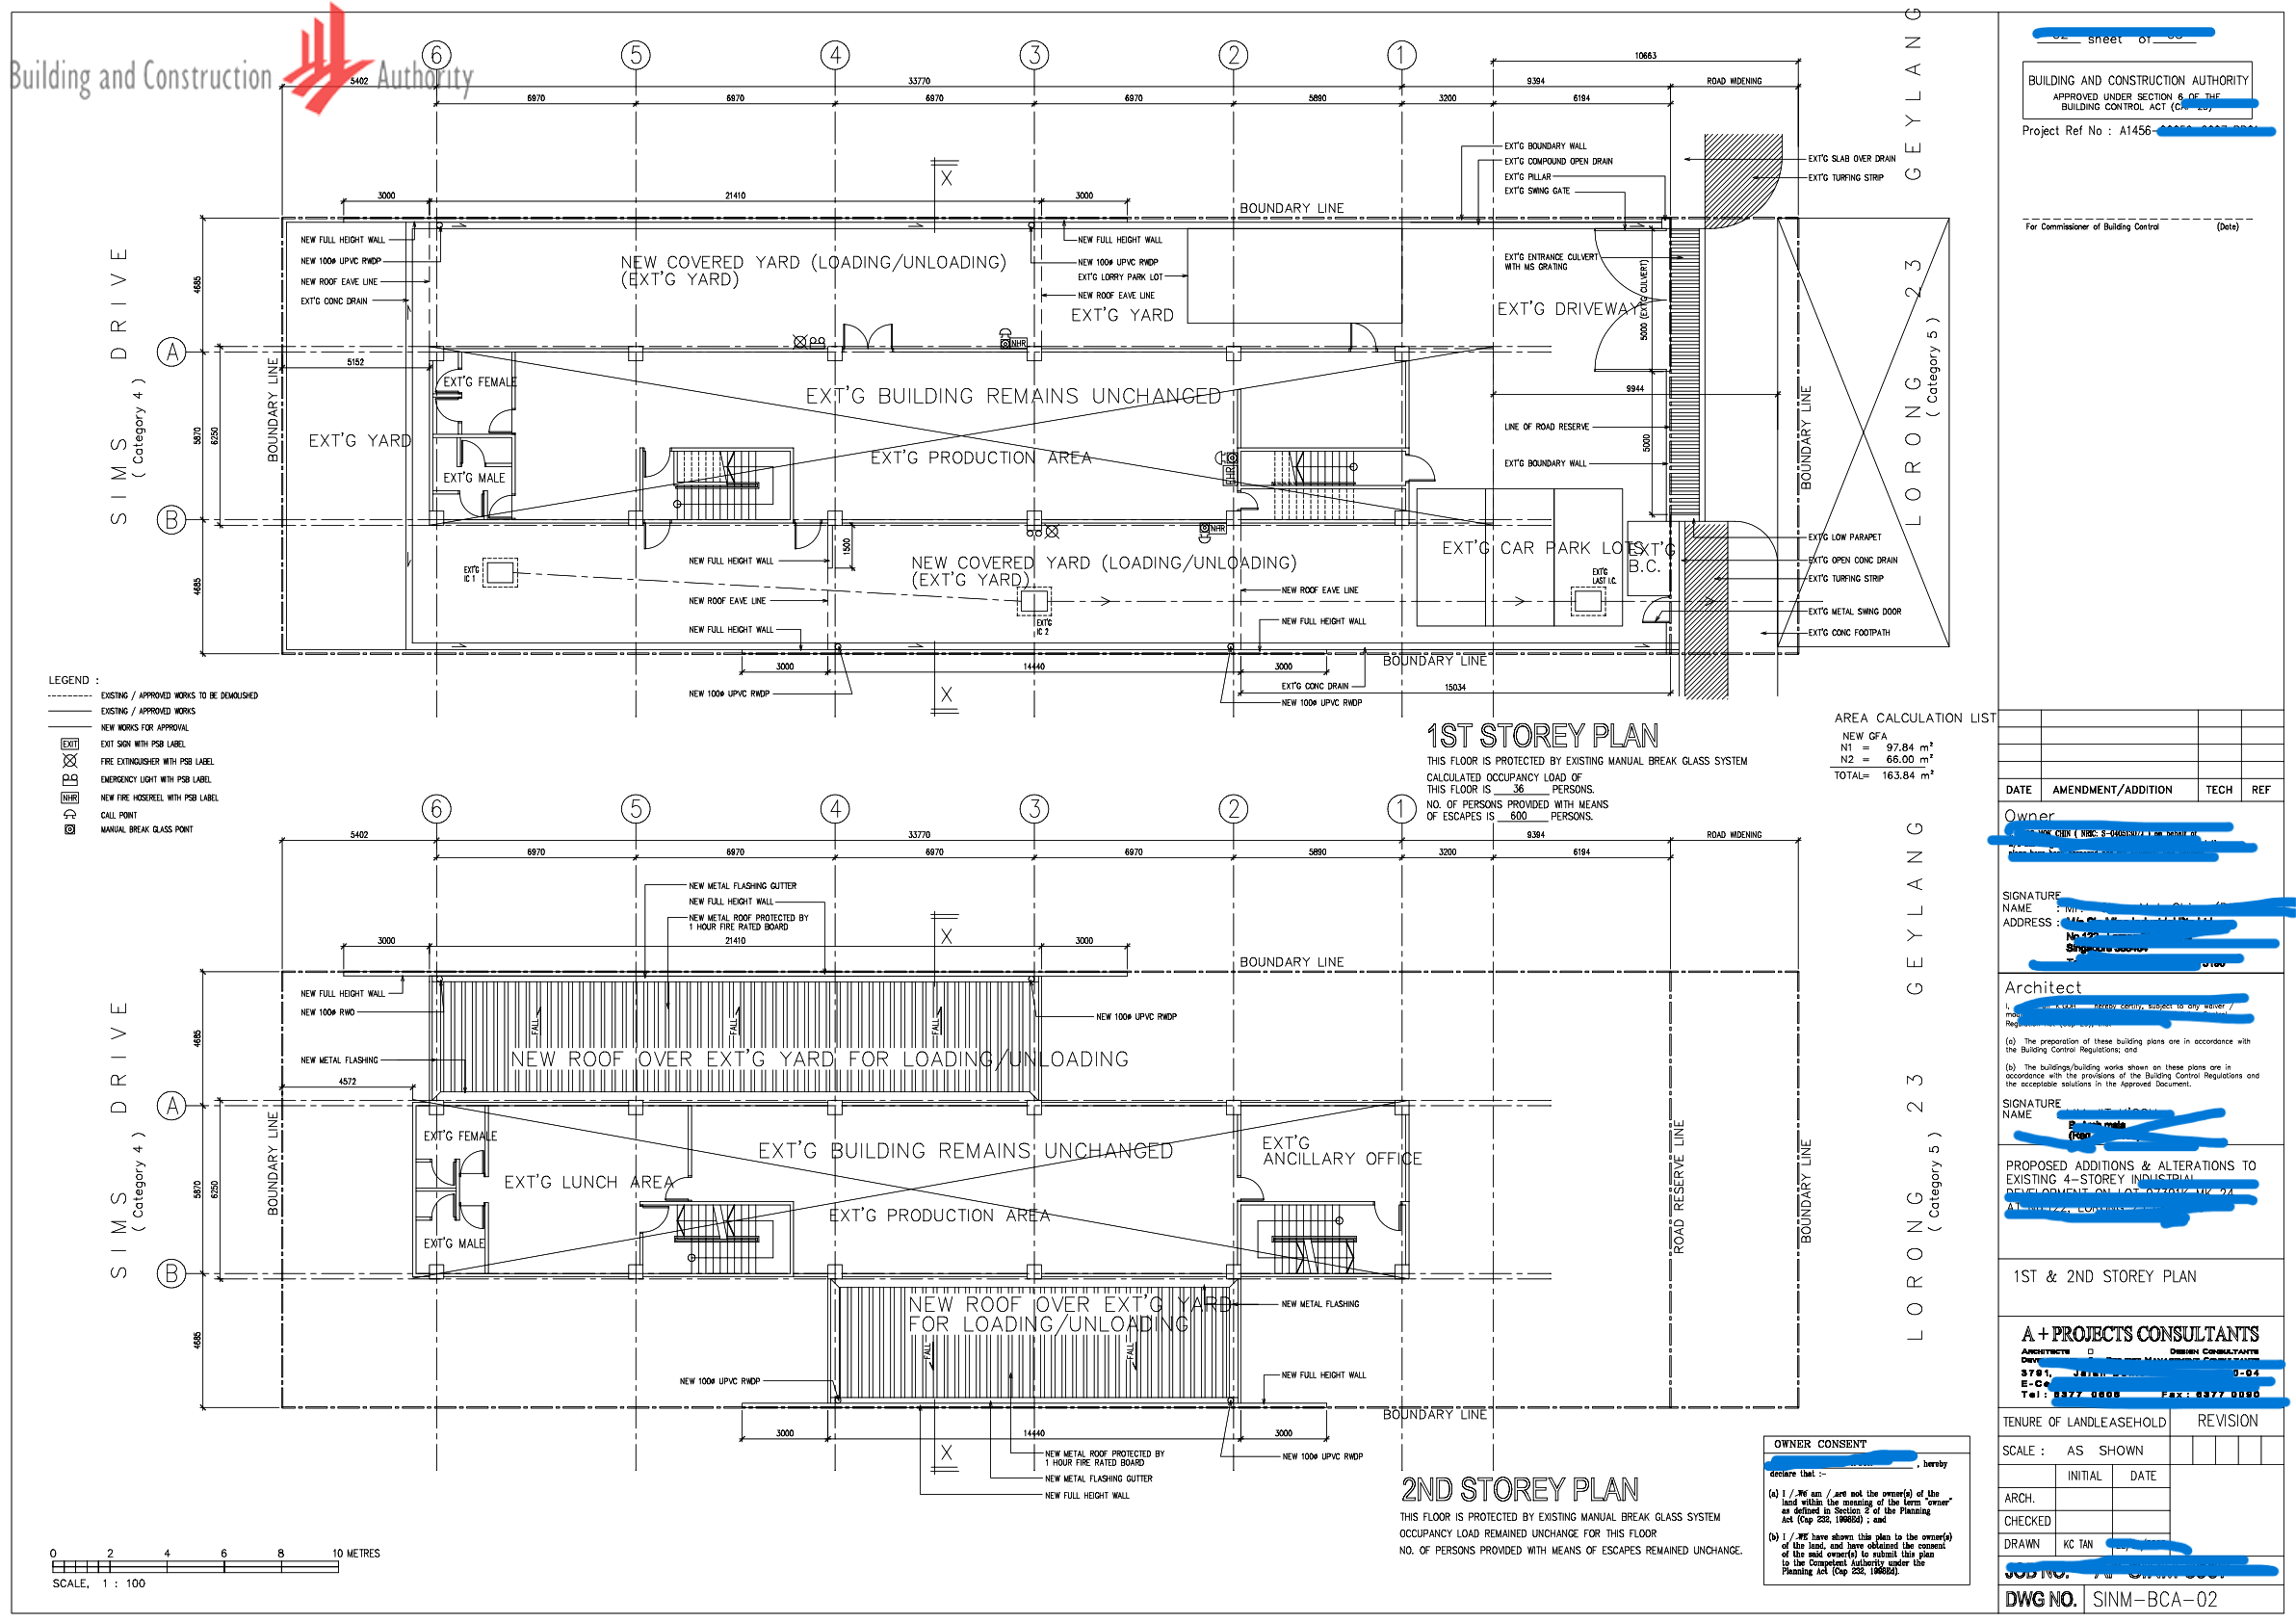 Example of Floor Plan from BCA. This is for a Building in Geylang Area.